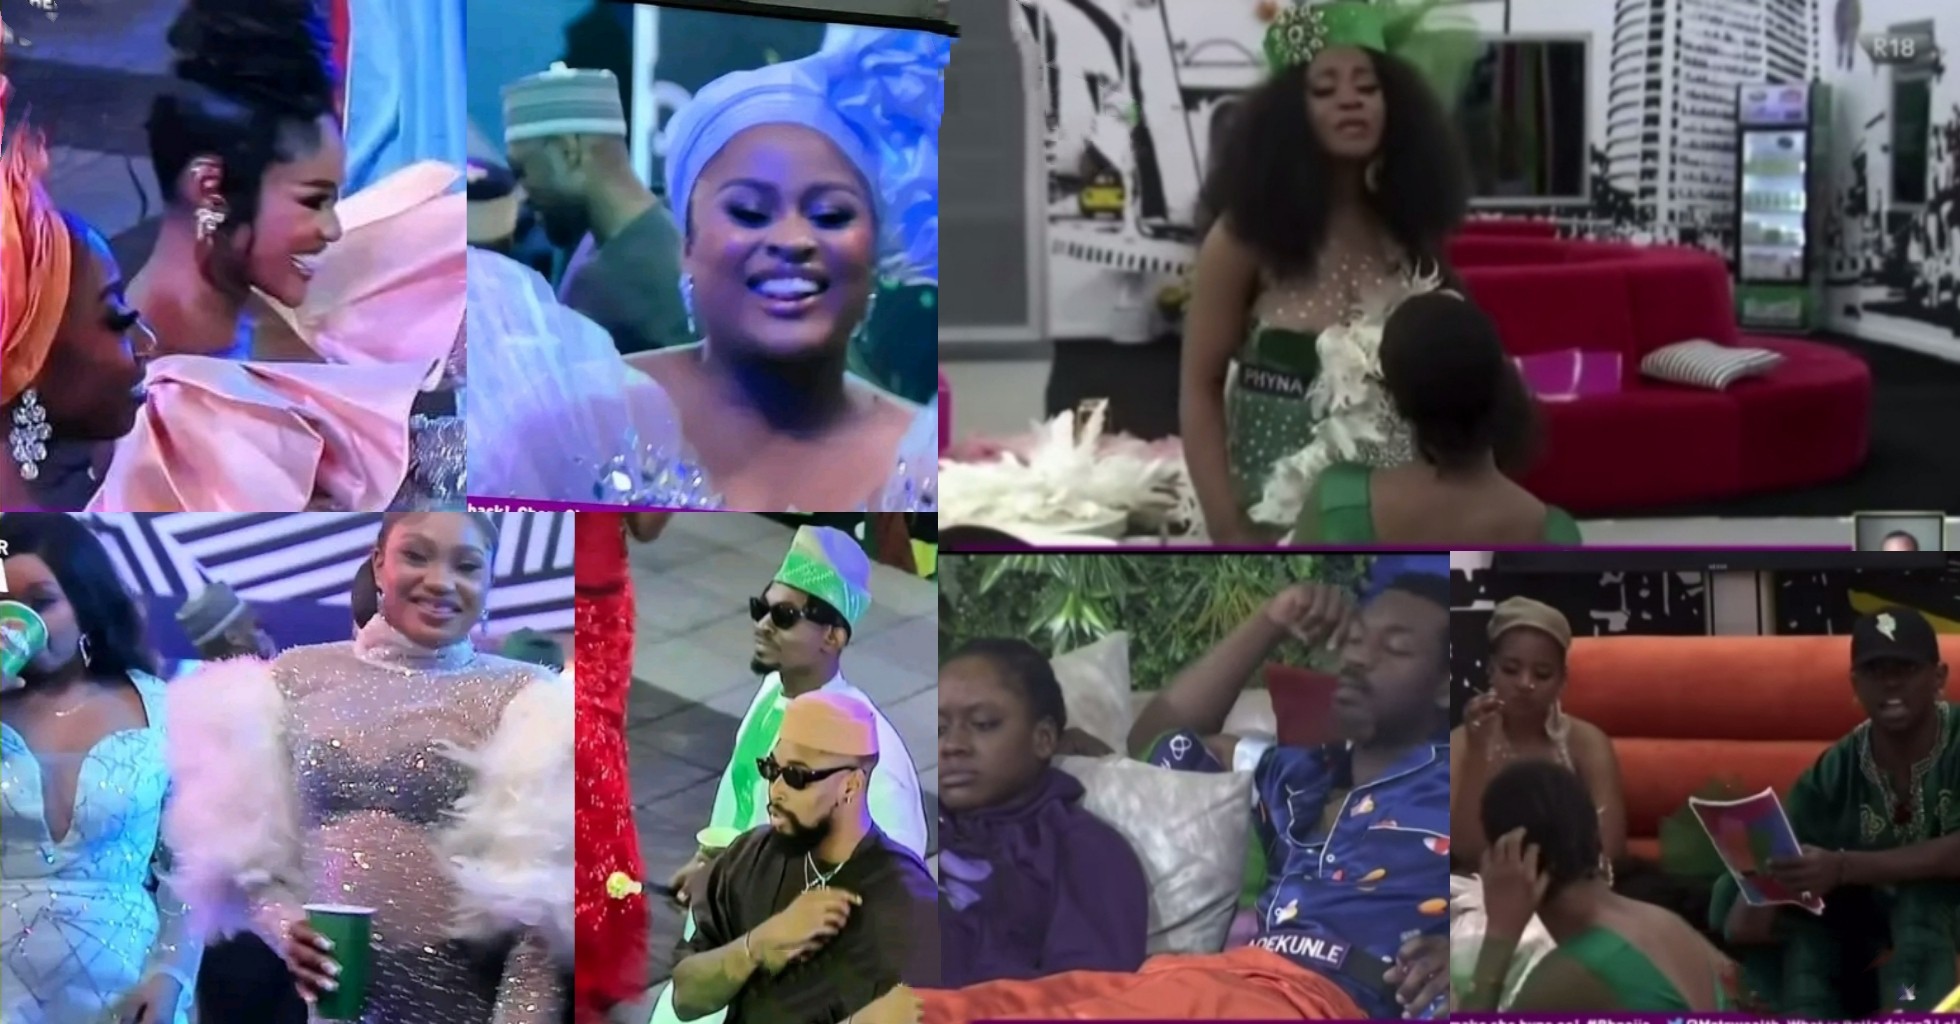 BBNaija Finale party: Beauty, Amaka, others join Finalists; Khalid ignores Daniella; Phyna slams Groovy, More